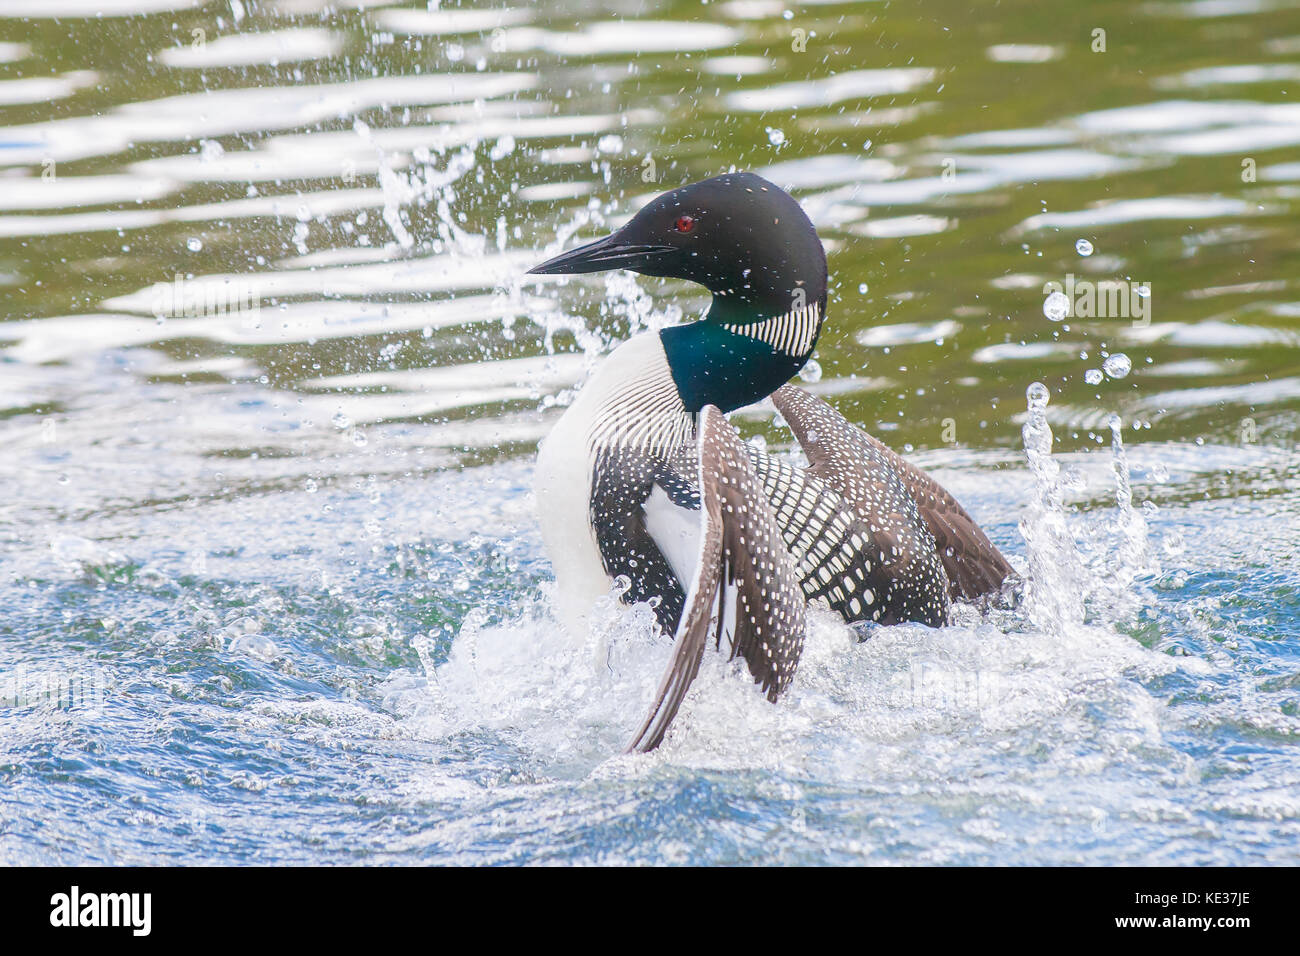 Adult common loon (Gavia immer) 'penguin dance', performed during periods of high anxiety, central Alberta, Canada Stock Photo